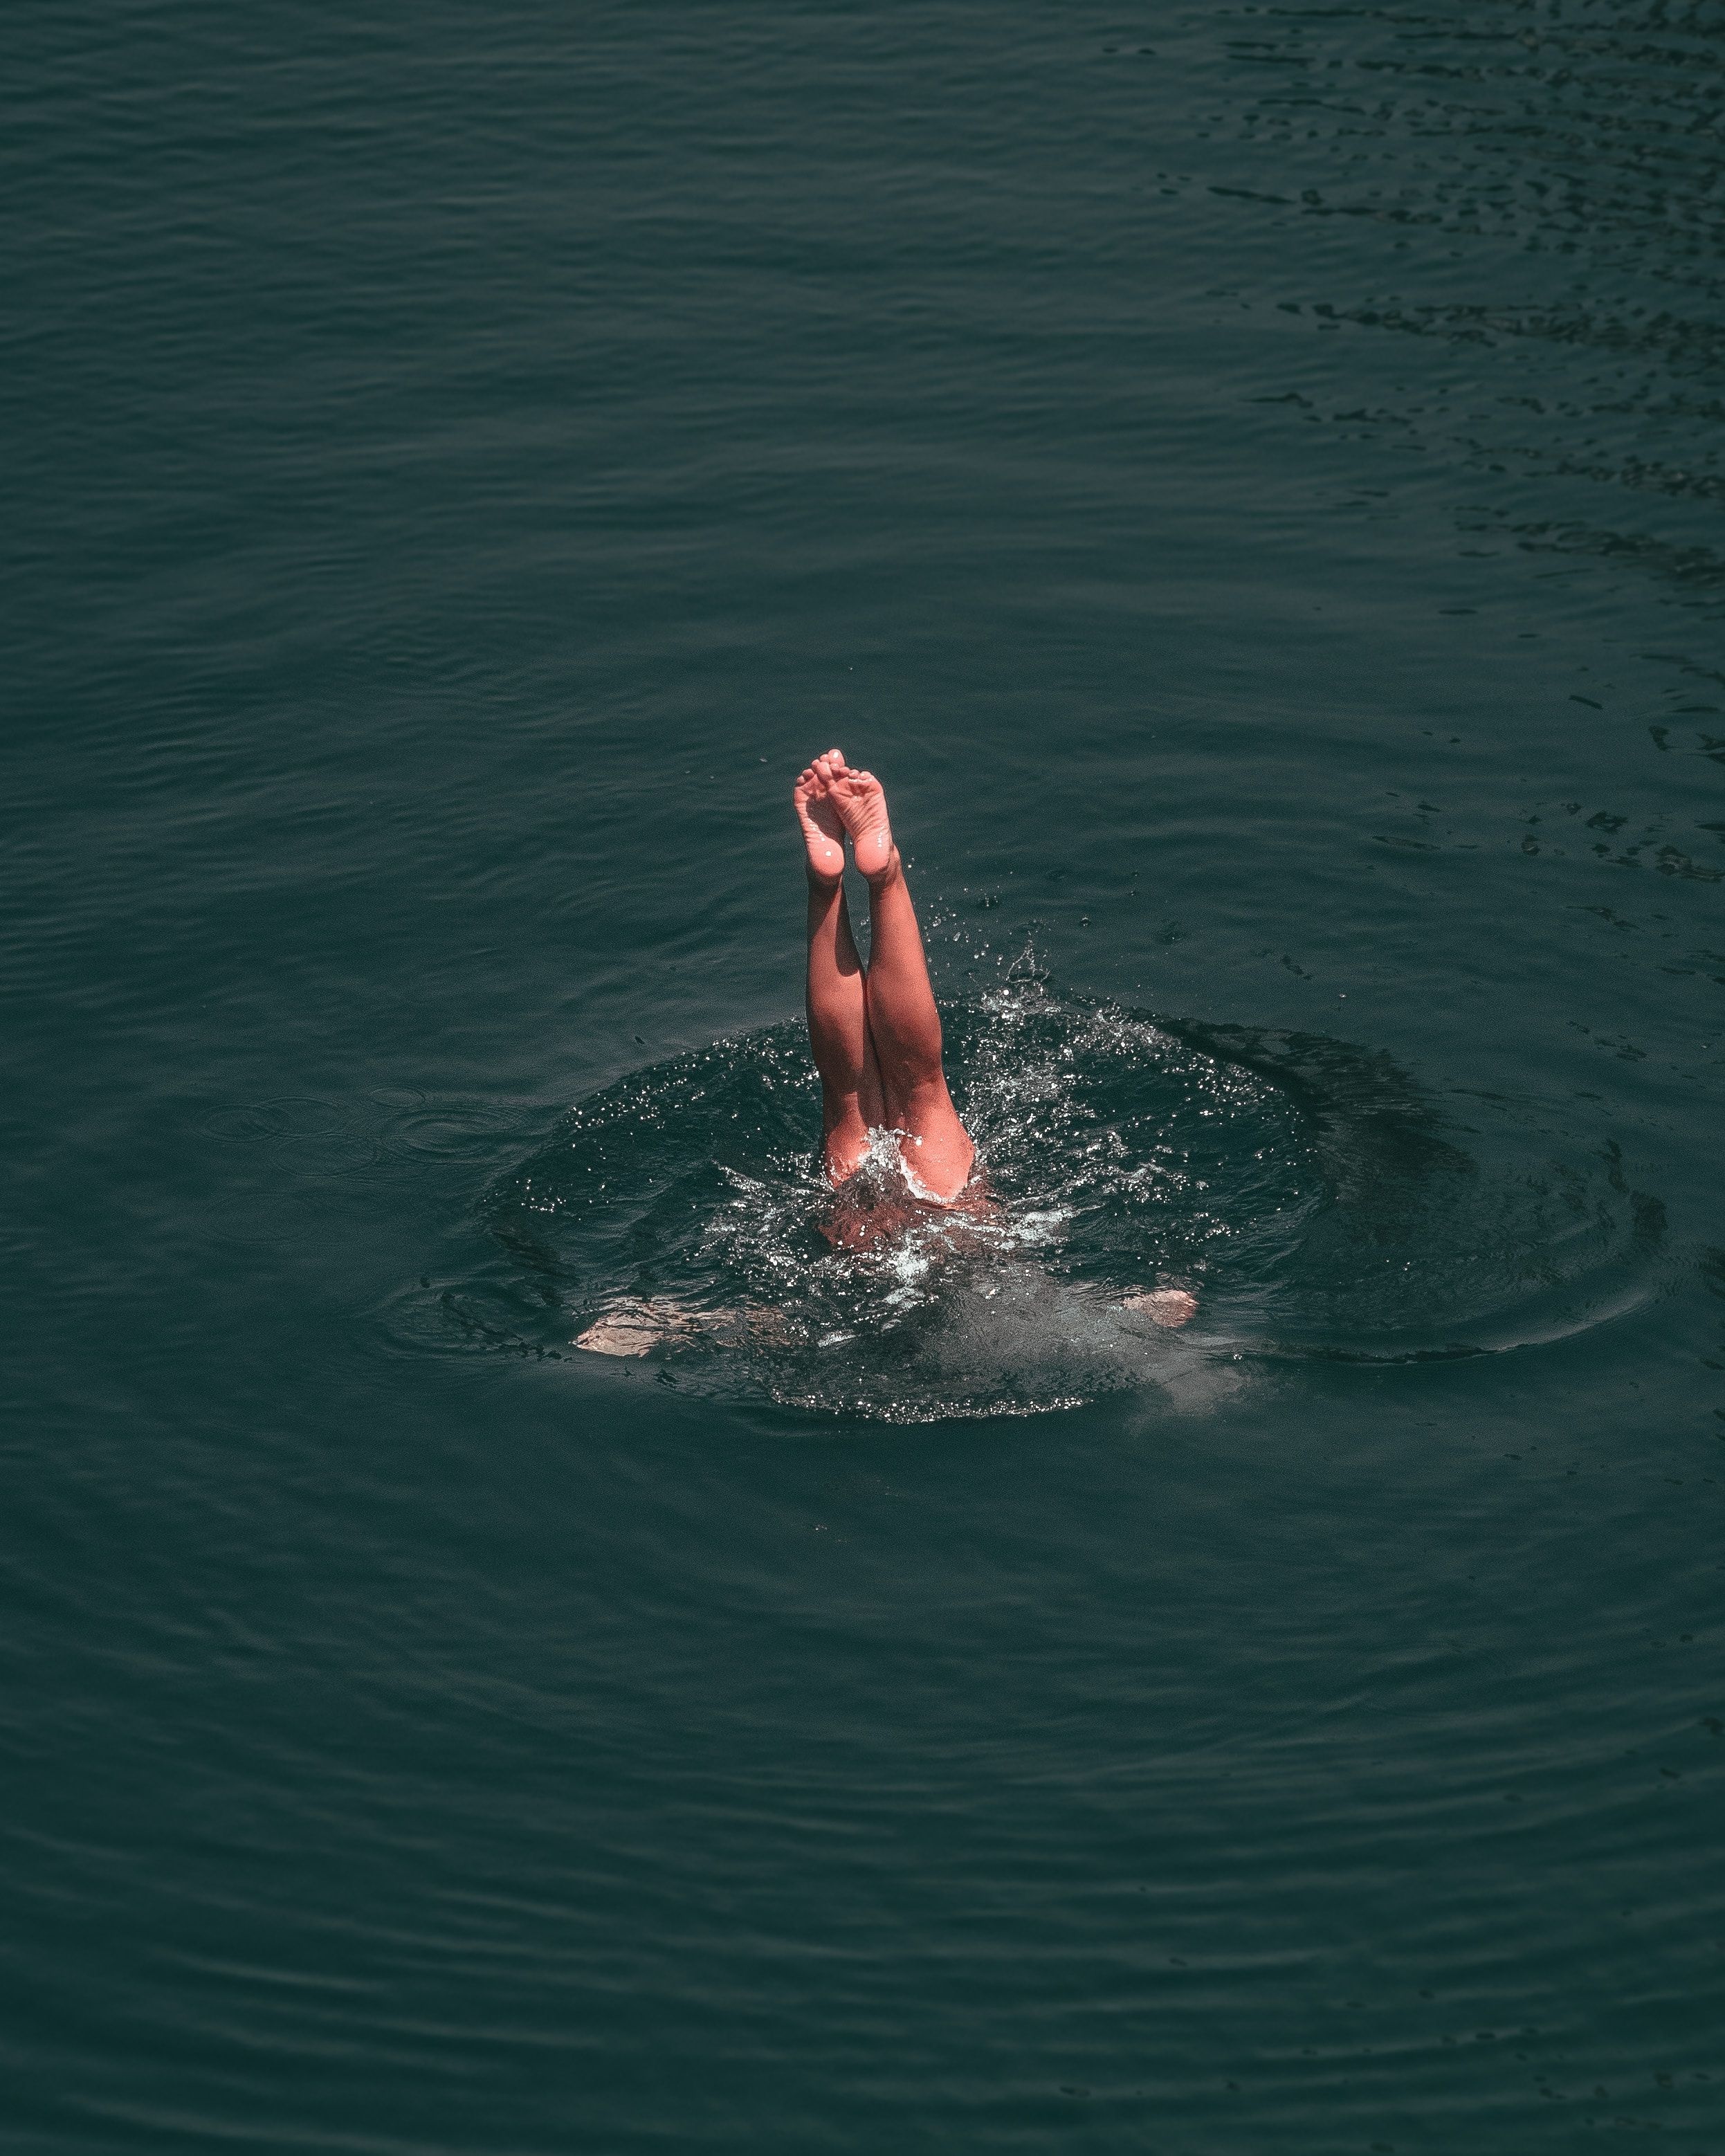 Am image of a young woman diving into a lake